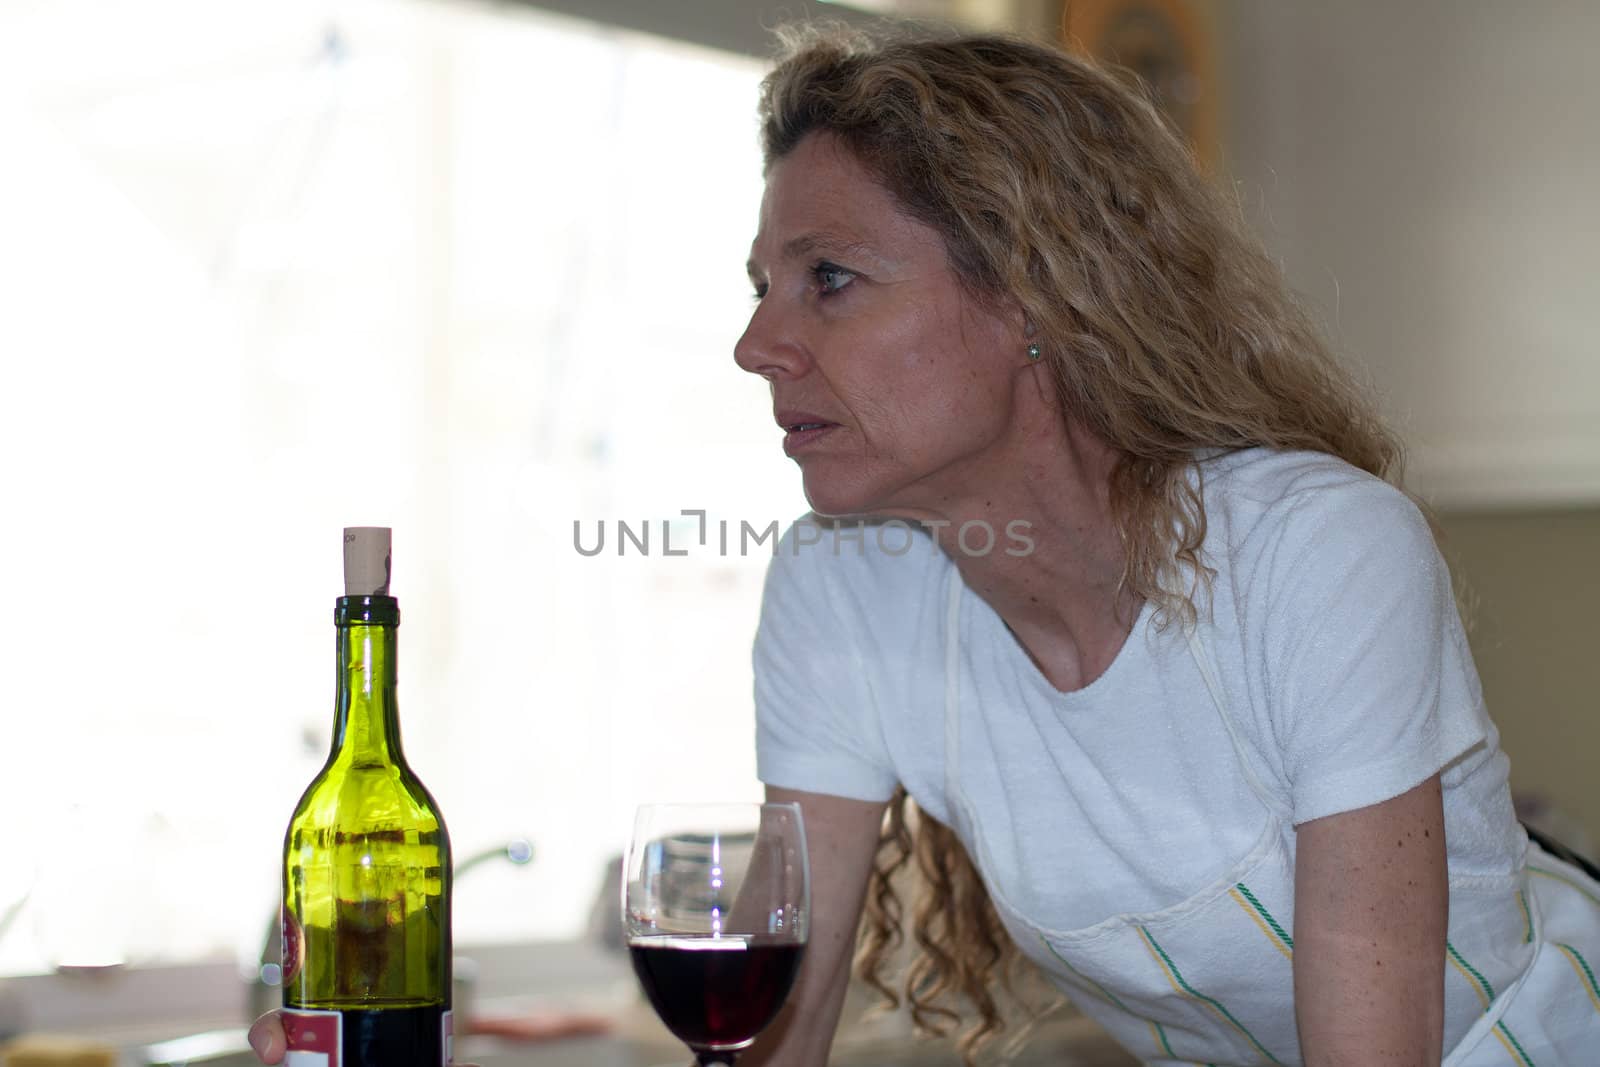 Depressed woman, drinking wine in kitchen during the day